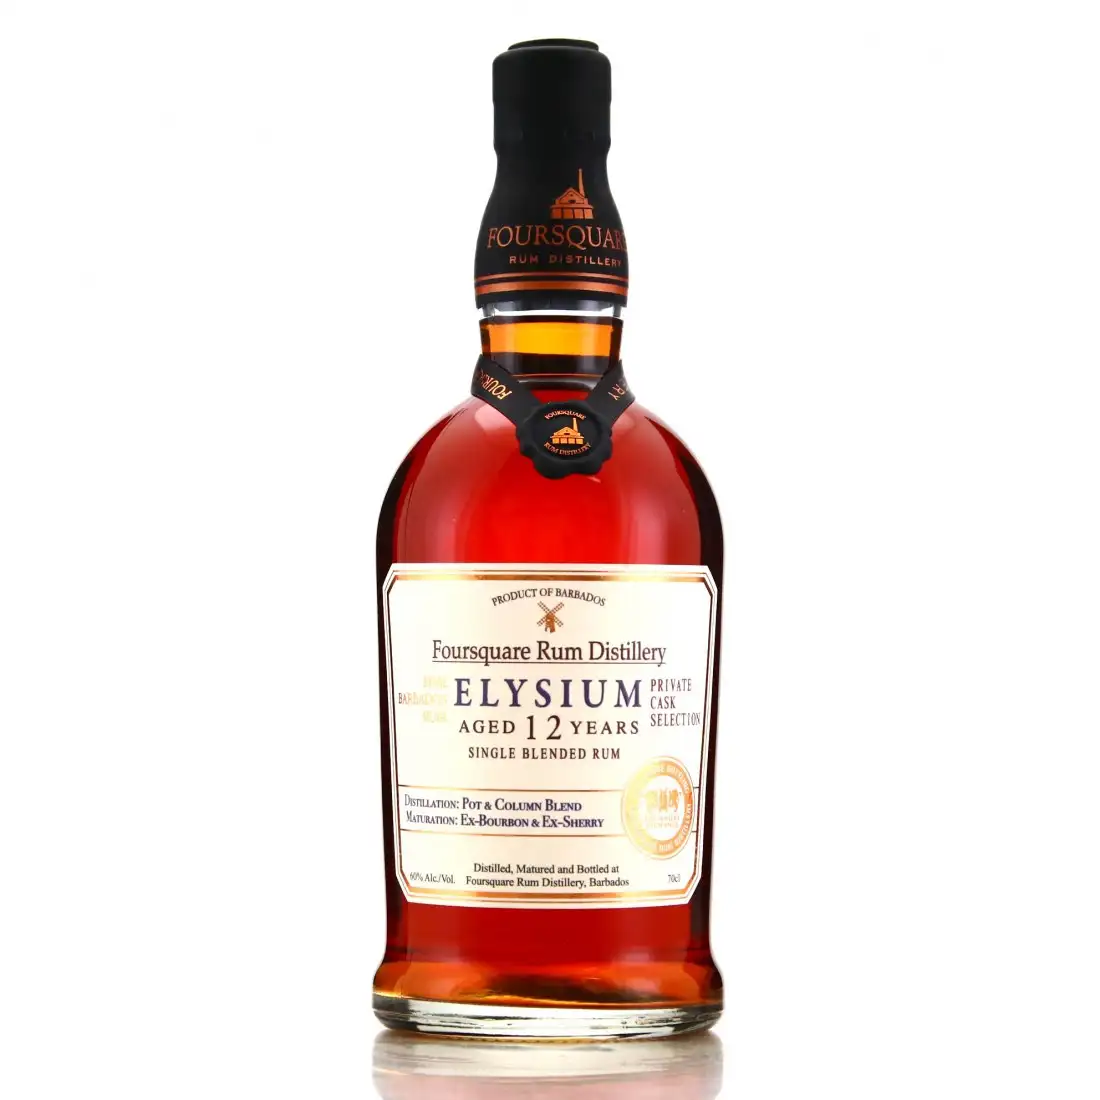 Image of the front of the bottle of the rum Private Cask Selection Elysium